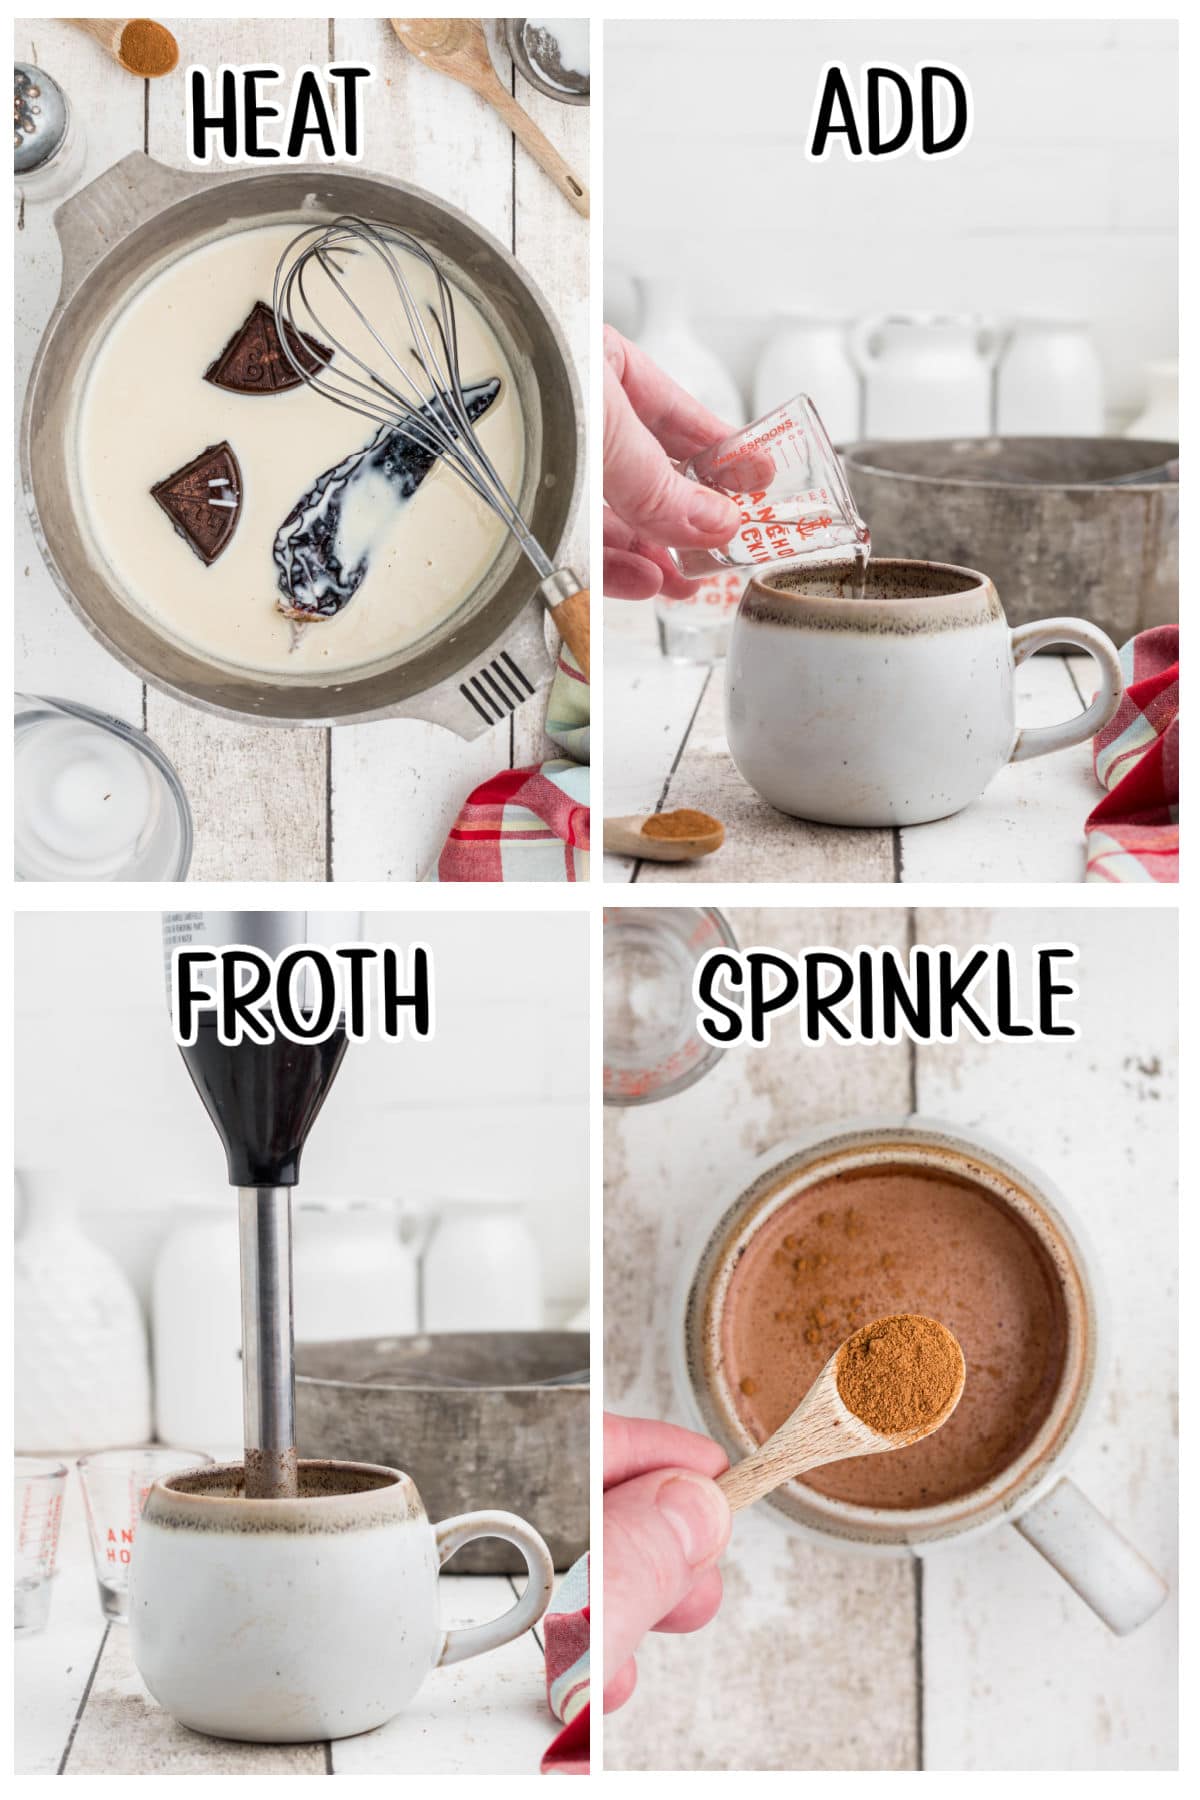 Step by step images showing hot to make this drink.